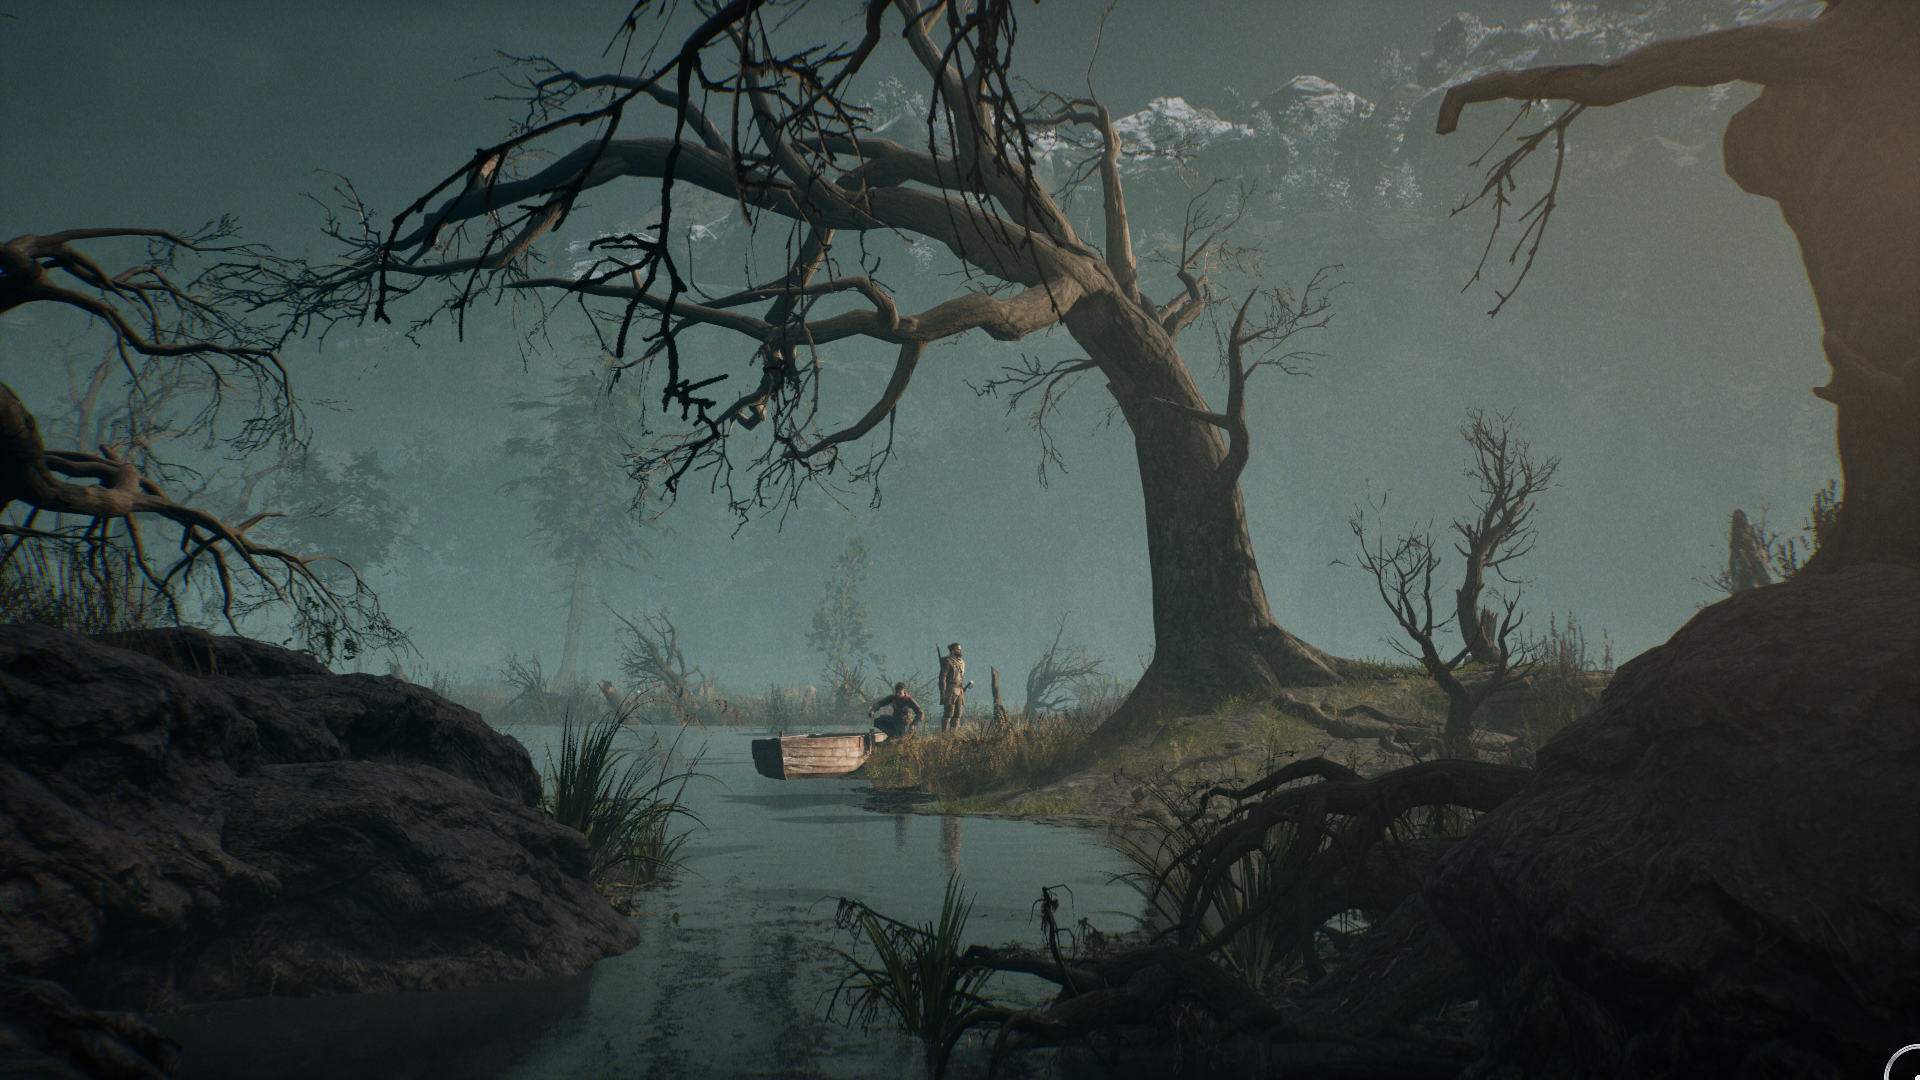 Banishers Ghost Of New Eden Video Games Ghost Fireplace Dead Trees River Gaming Series 1920x1080